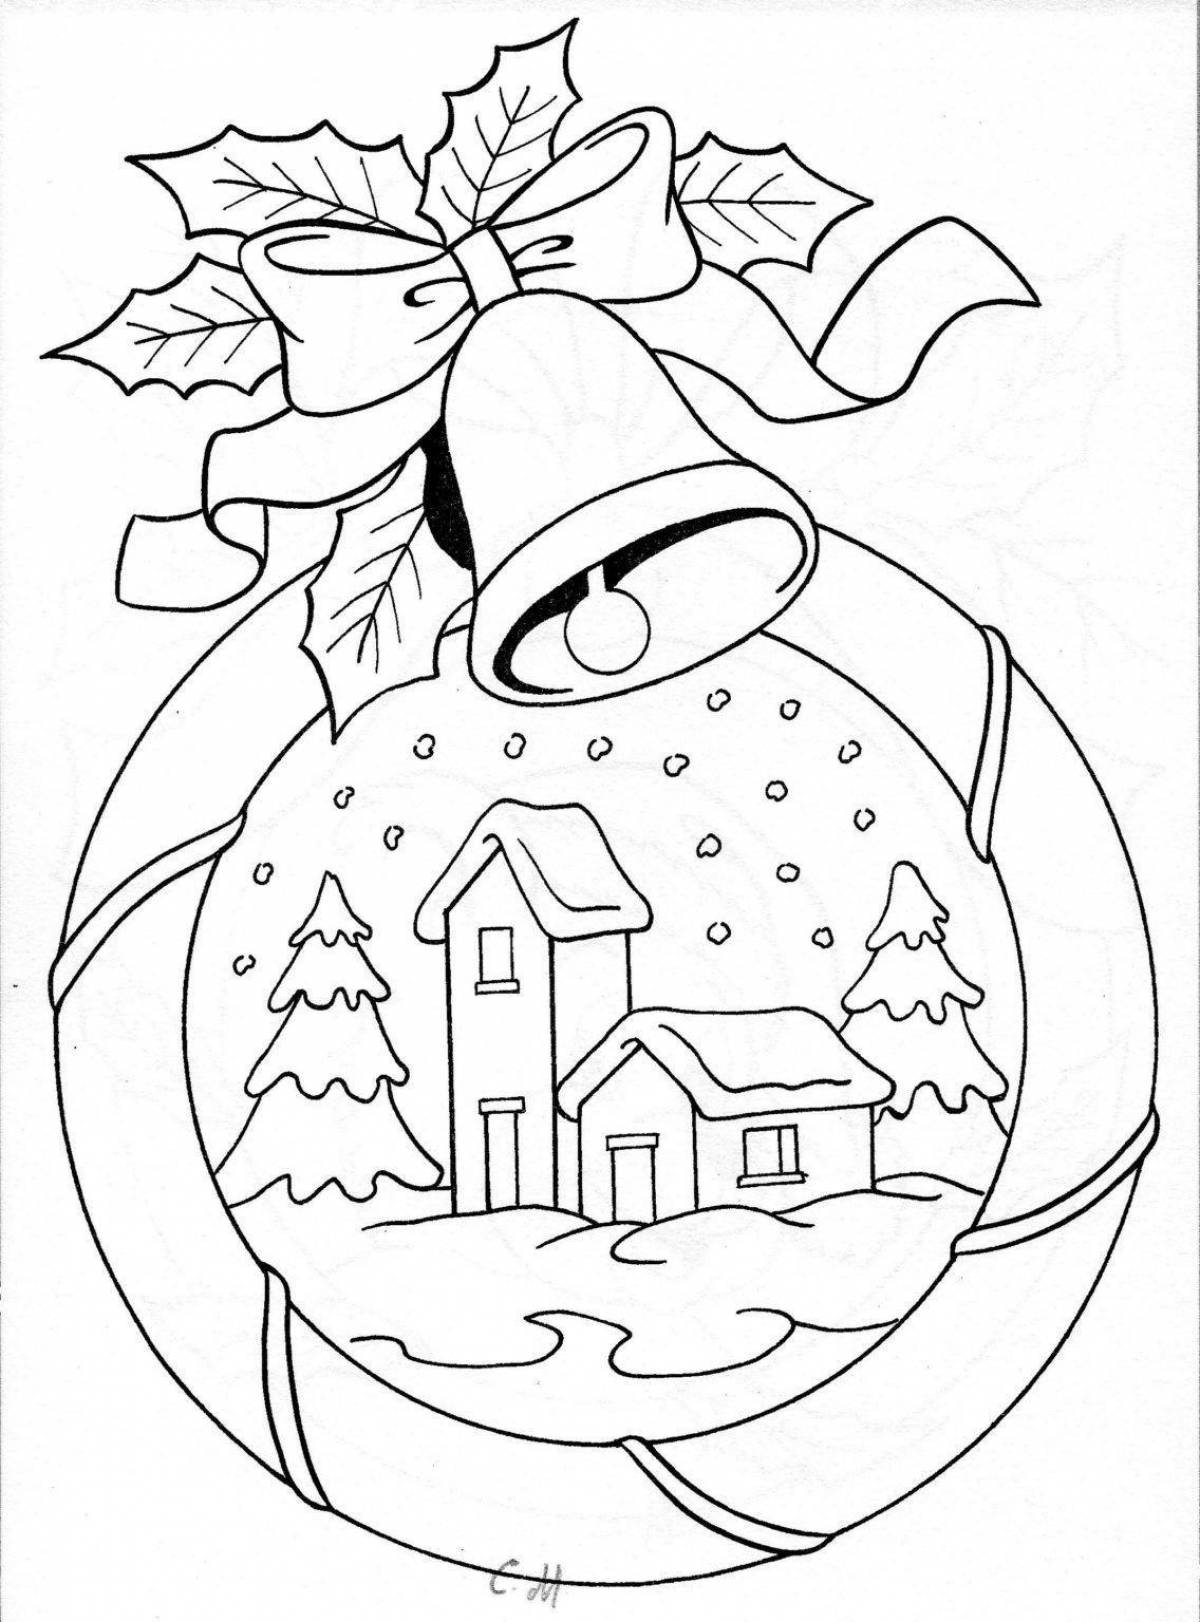 A fun coloring Christmas card for kids